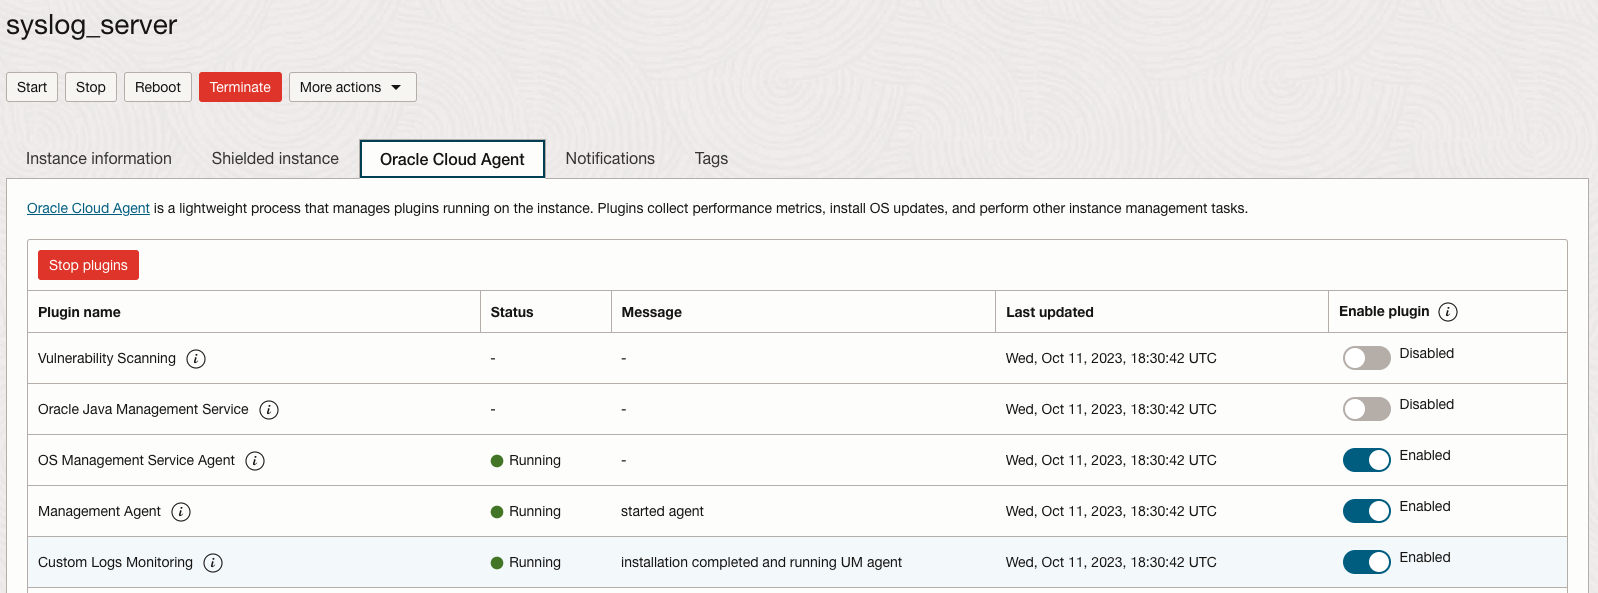 OCI syslog server Oracle Cloud Agent